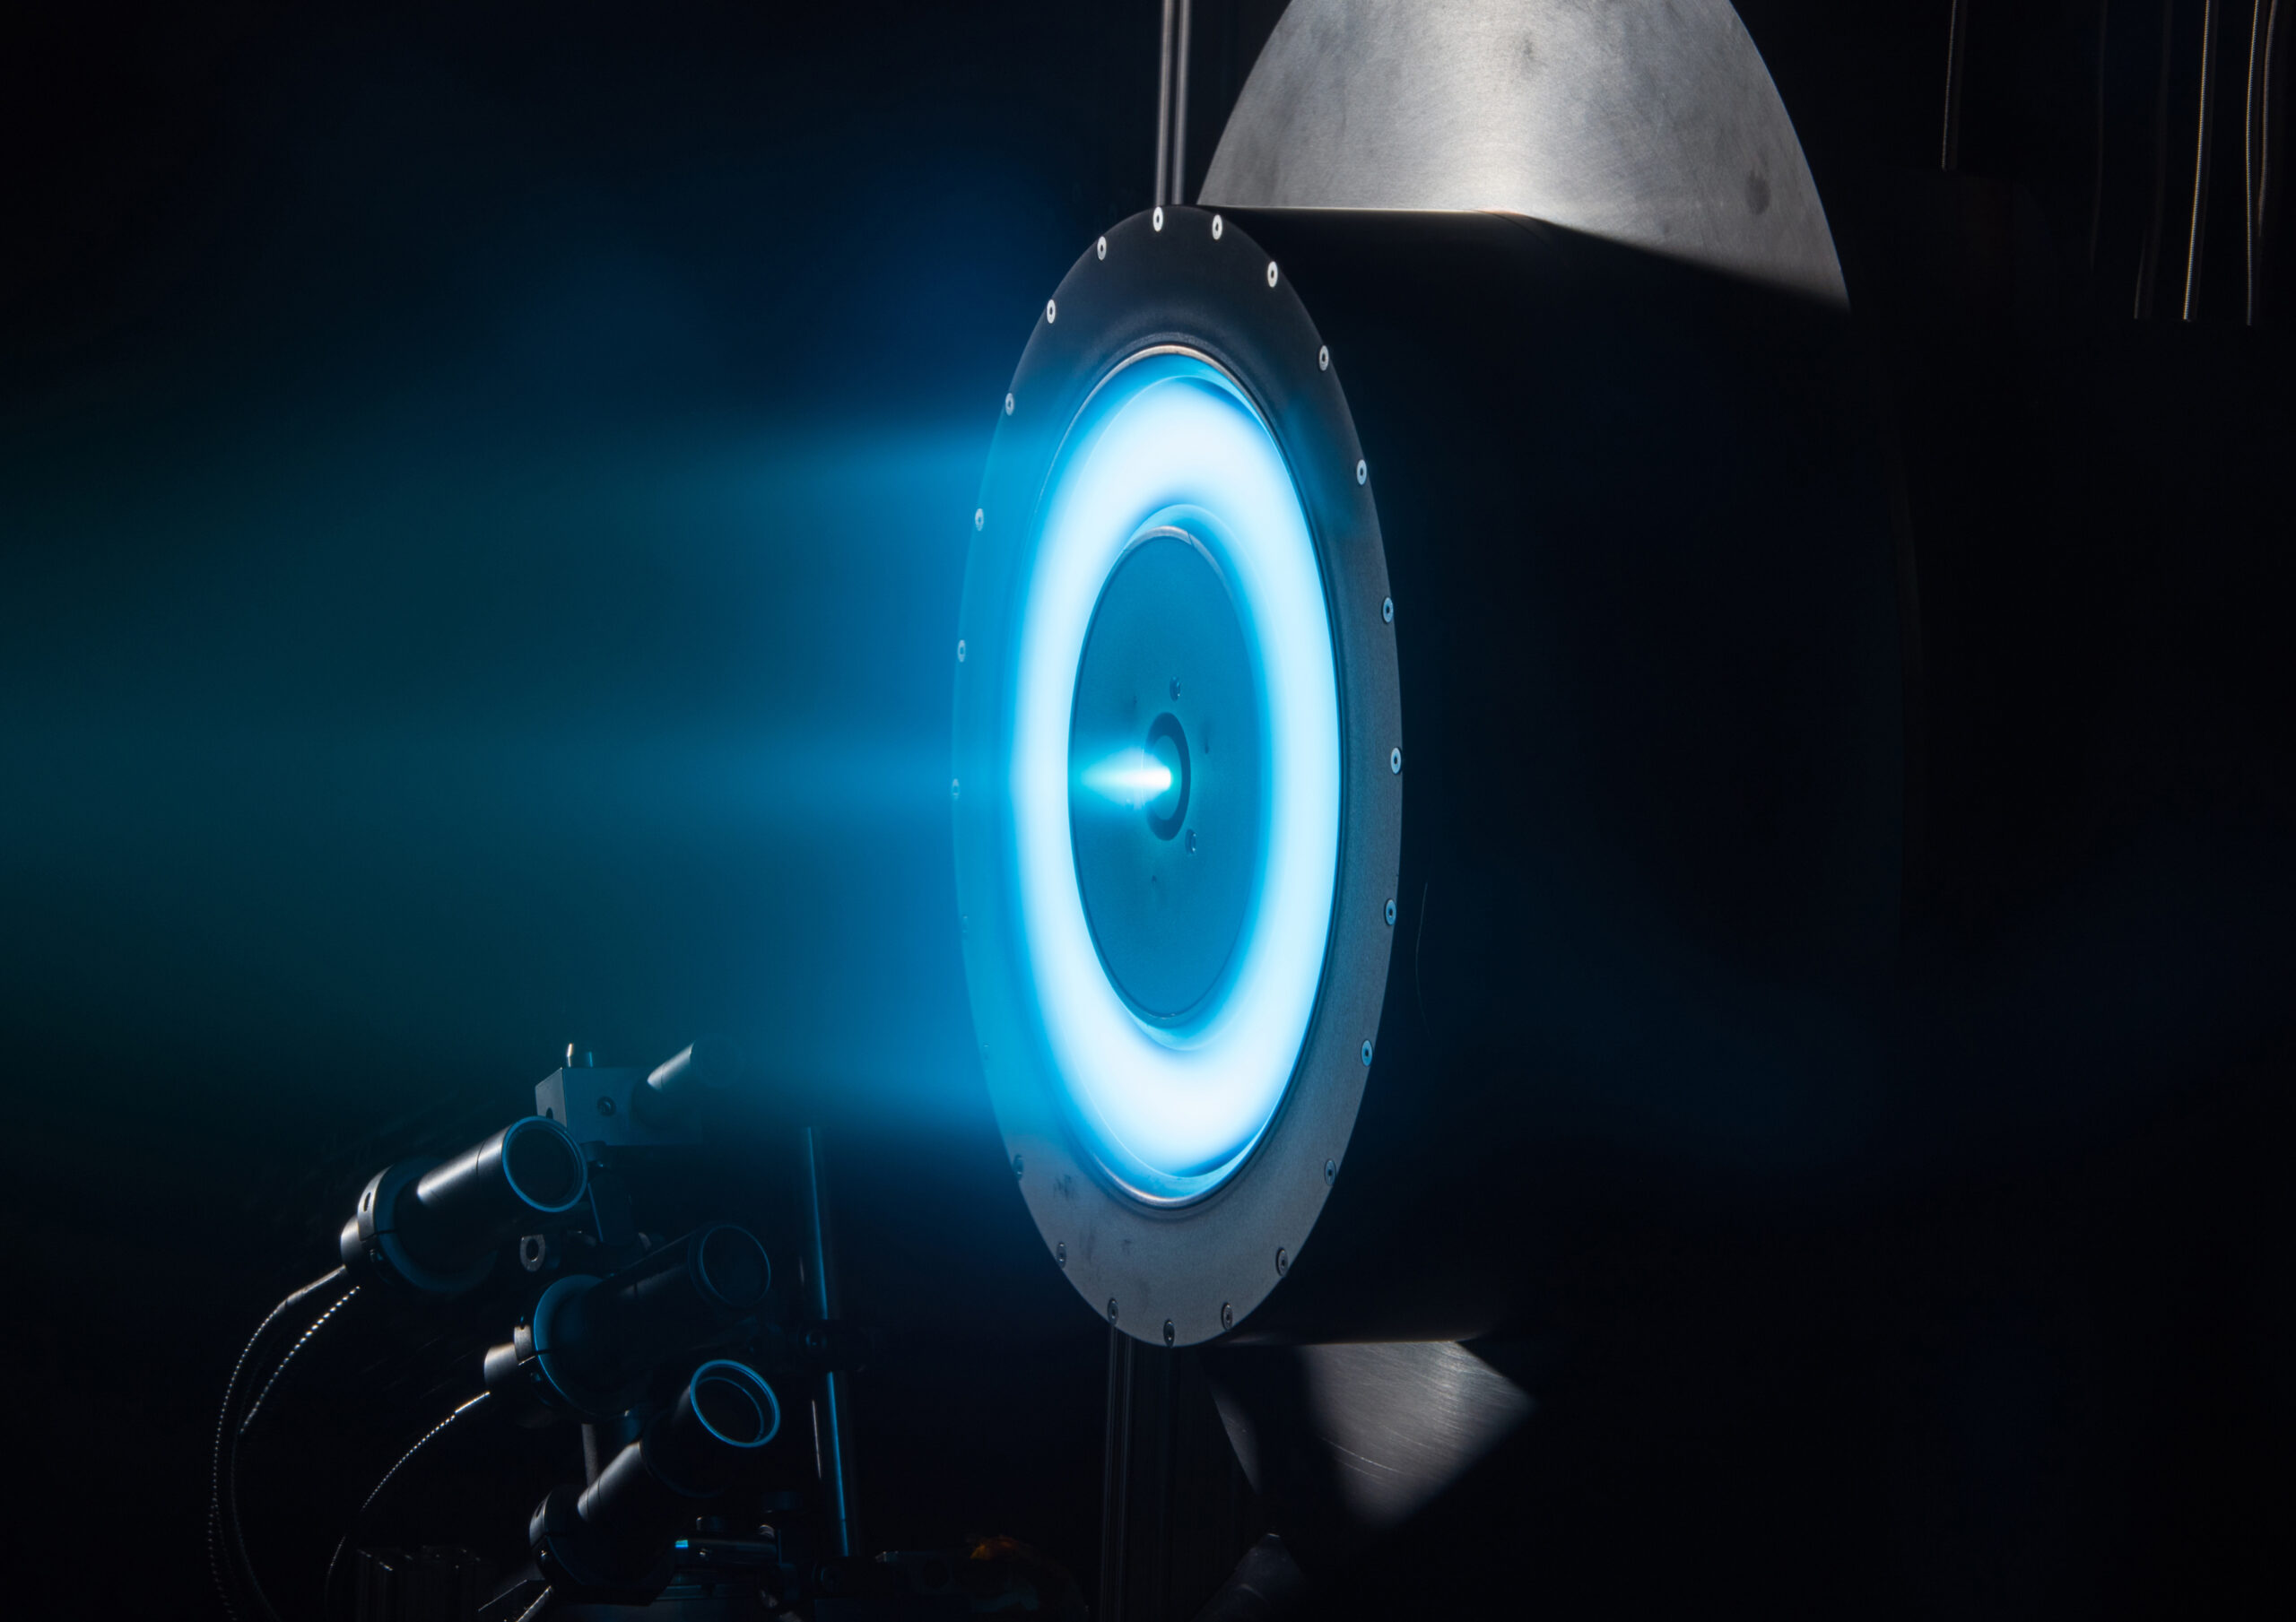 plasma-thrusters-used-on-satellites-could-be-much-more-powerful-than-previously-believed